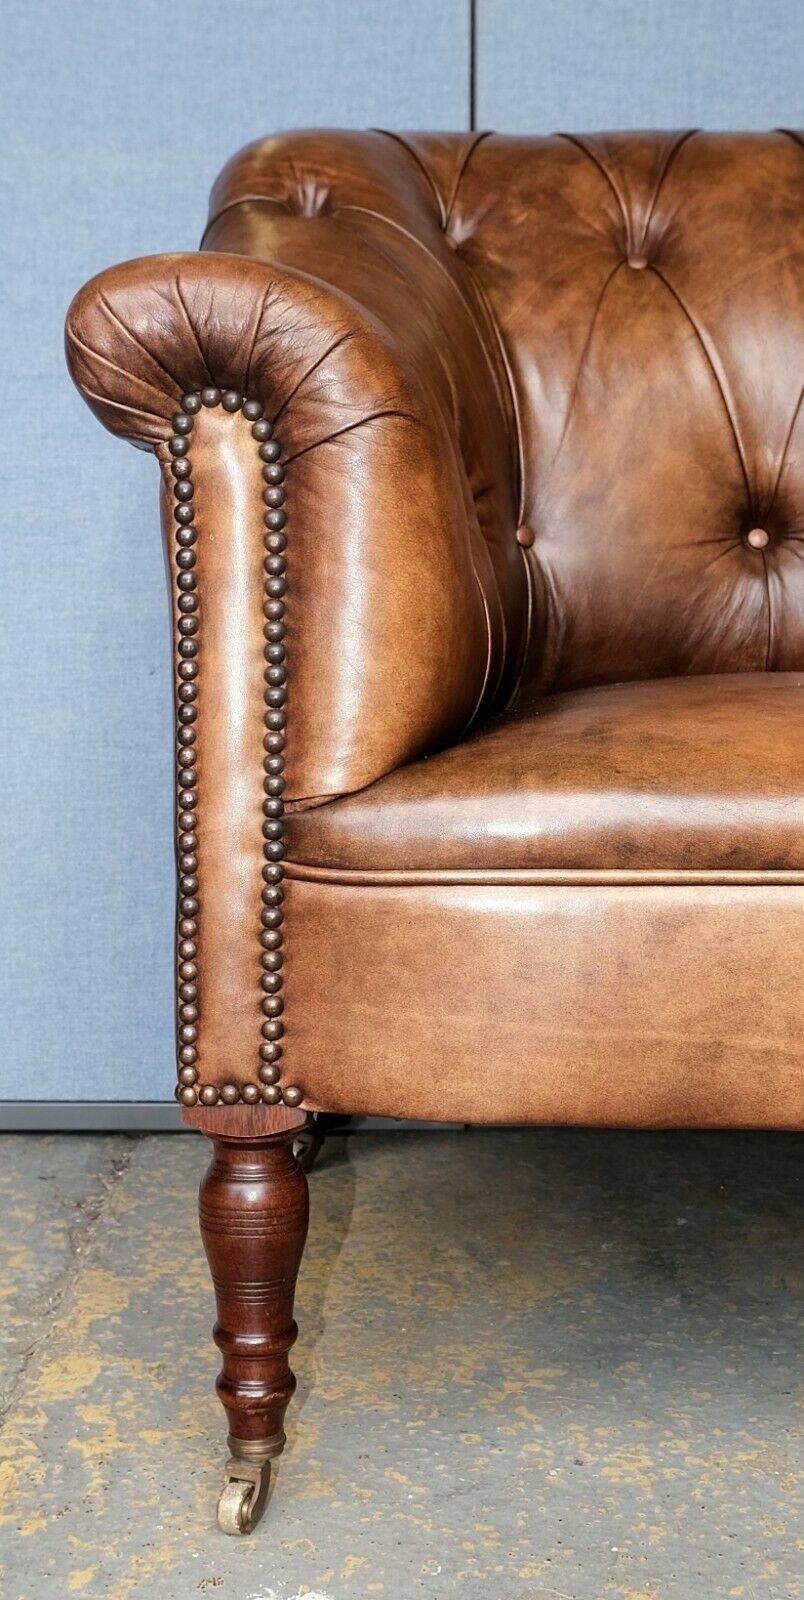 Georgeous Somerville George Smith Distress Brown Leather Chesterfield Armchair 2